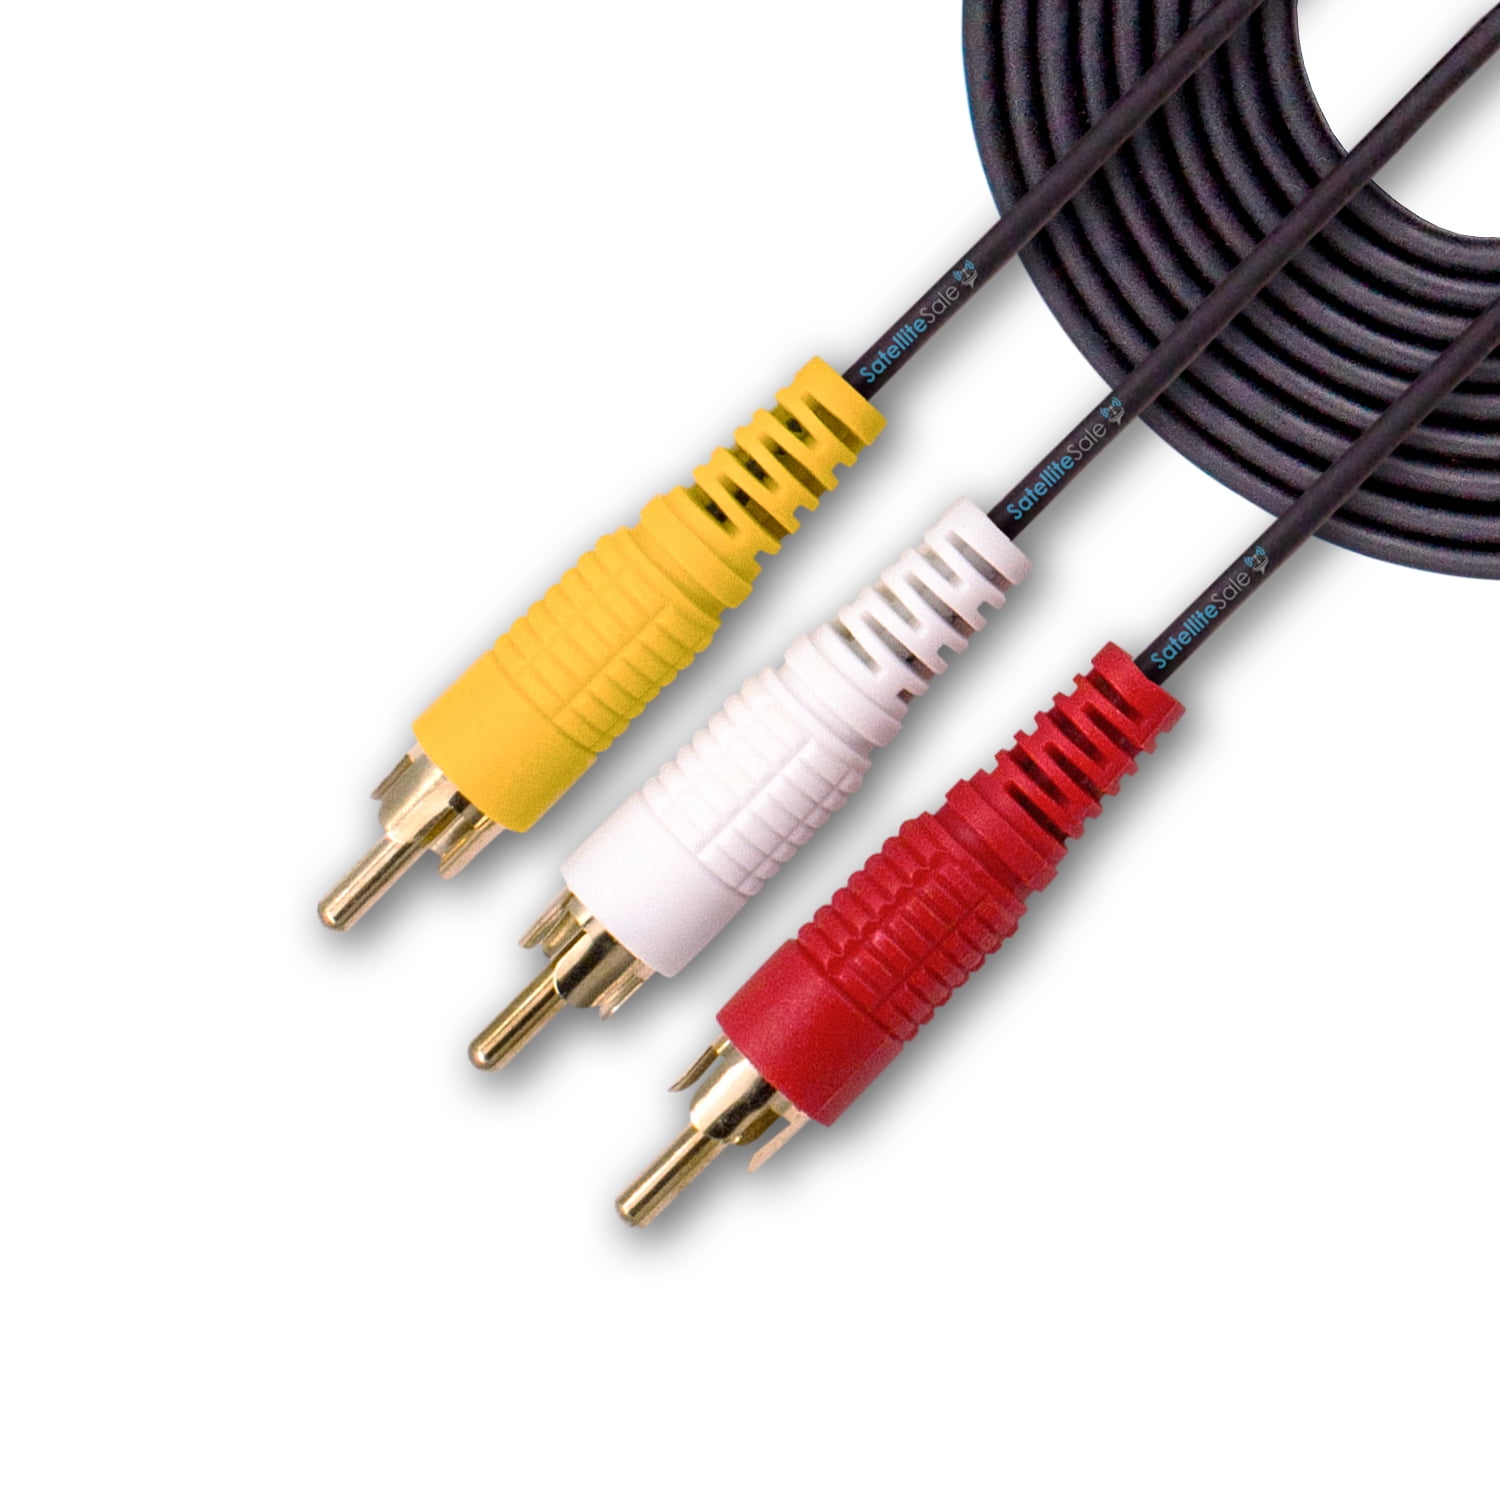 3 Pack Pro Quality 3 Foot 3ft Single RCA Male A/V Cable Shielded SKY71113 x3 